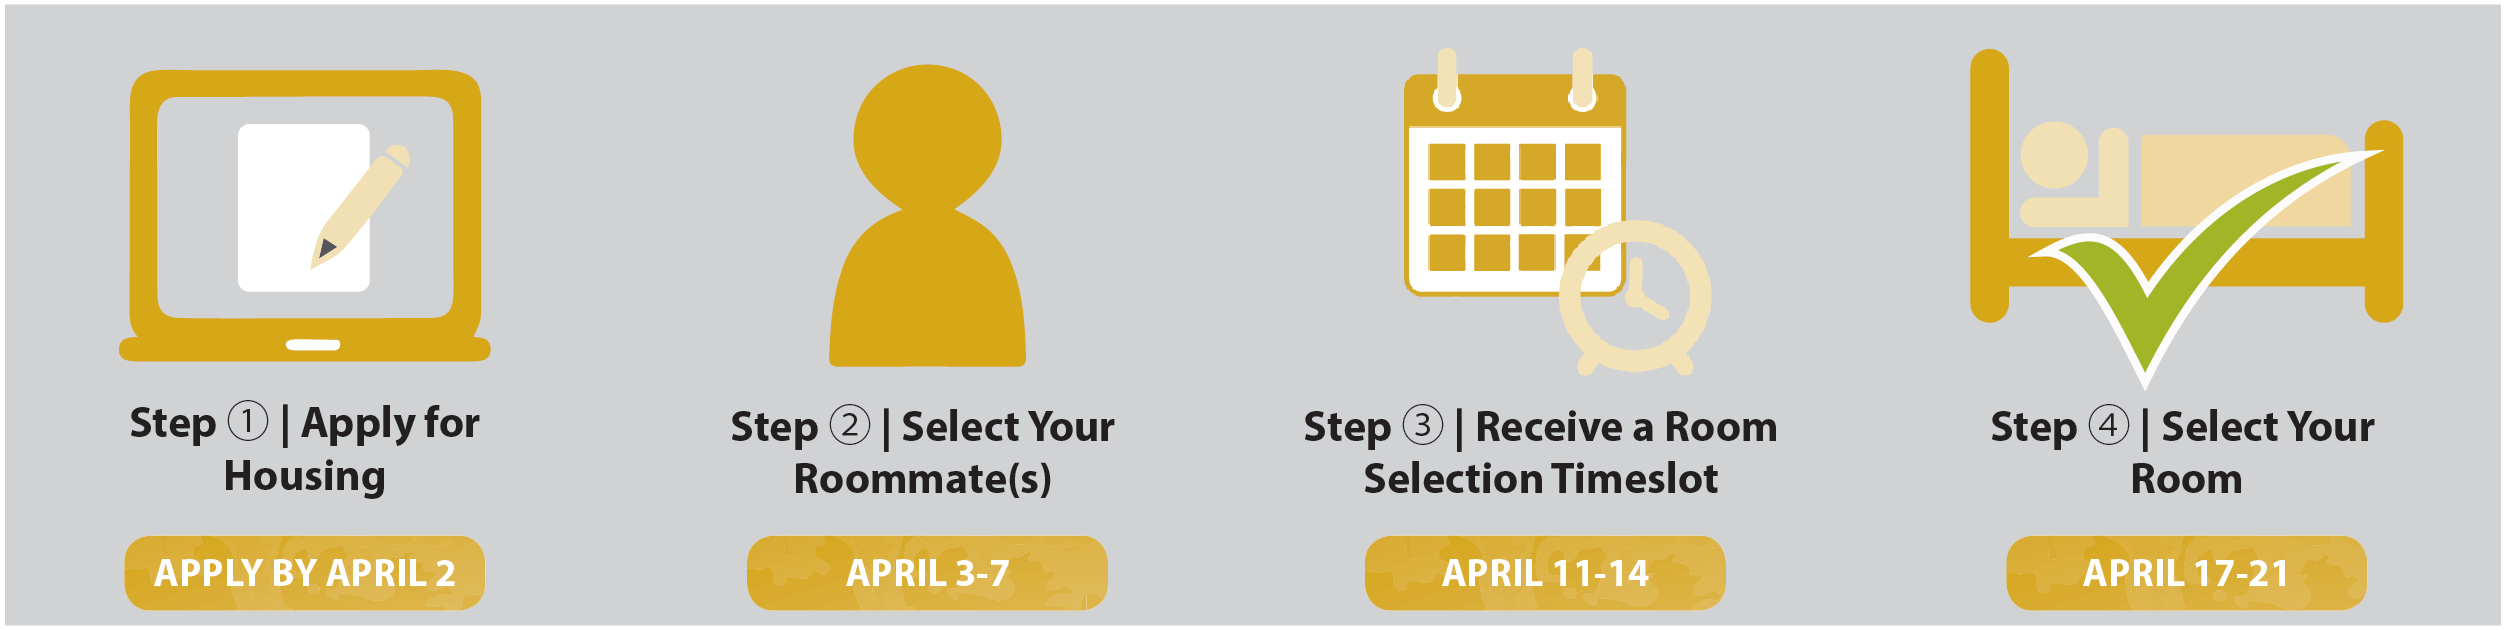 Room/Roommate Selection Process - 1 Apply for Housing, 2 Select your roommate, 3 Receive your timeslot, 4 Select your room